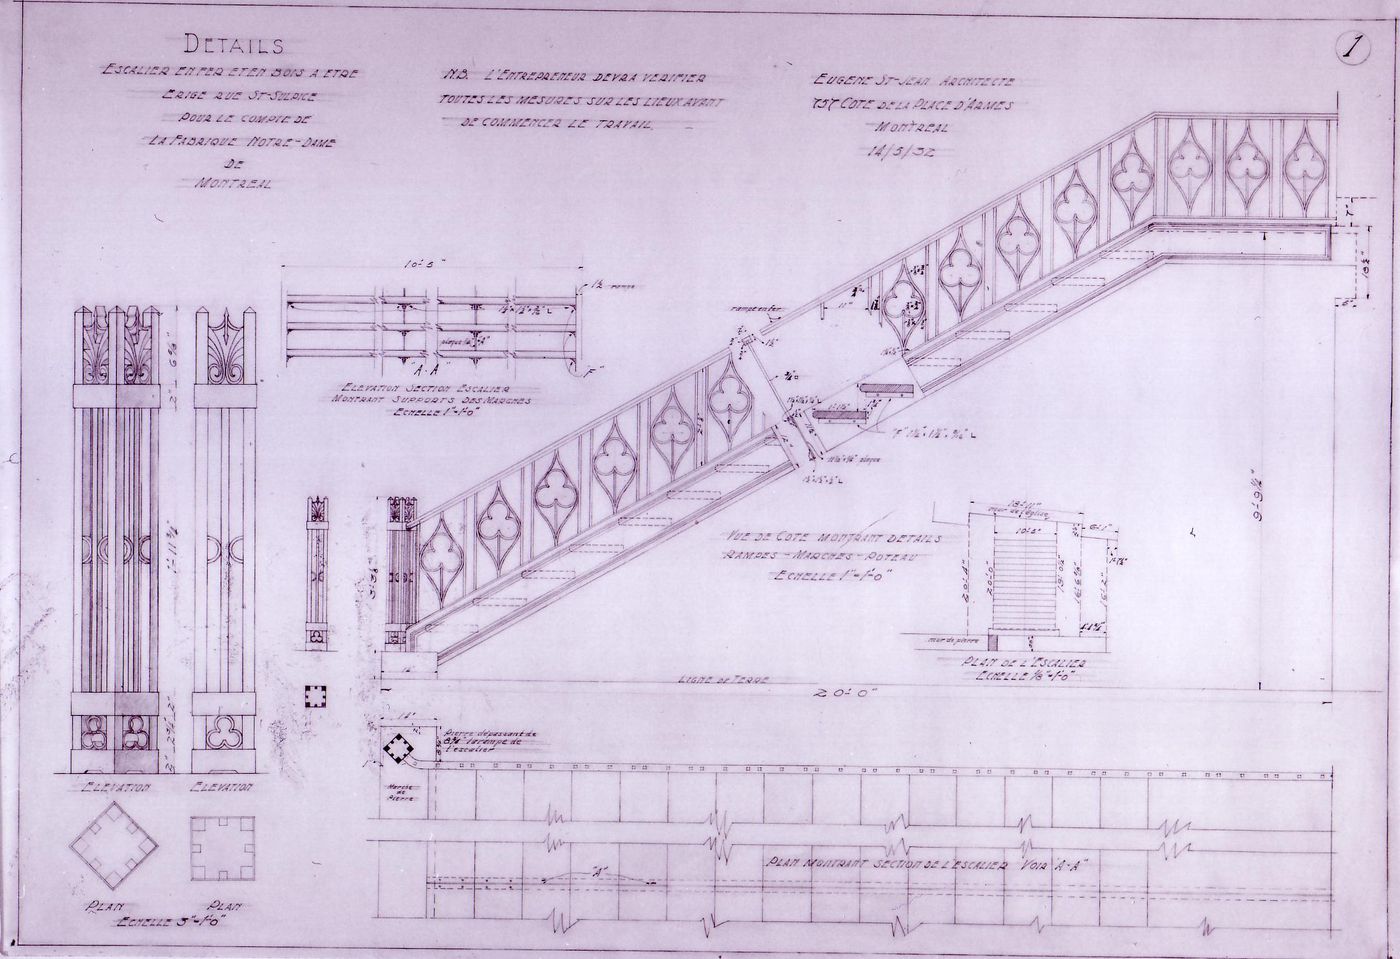 Plans, elevations and details for a balustrade and stairs for a chapel for Notre-Dame de Montréal, apparently for the renovations of 1929-1949, rue Saint-Sulpice